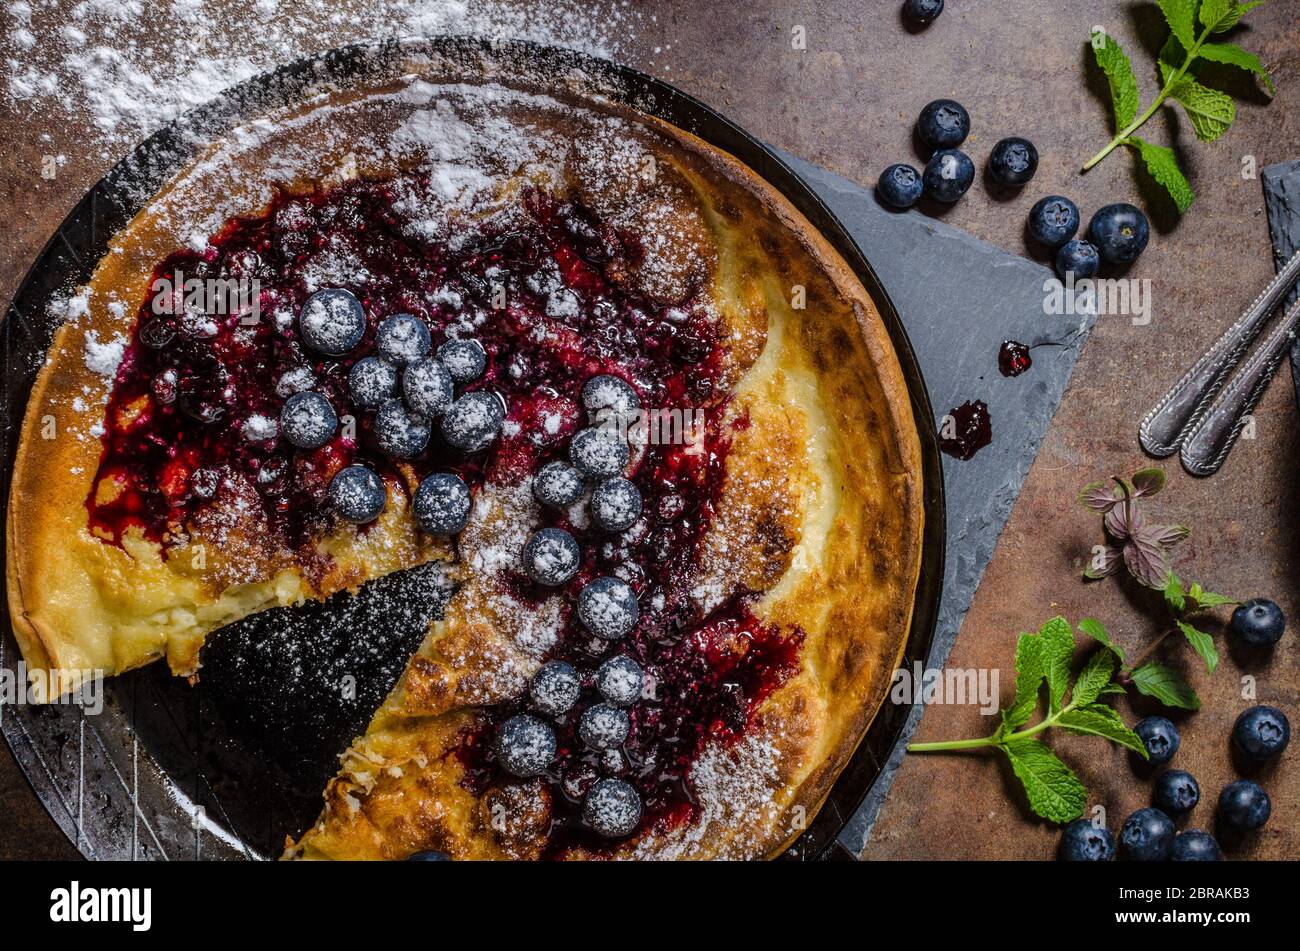 https://c8.alamy.com/comp/2BRAKB3/dutch-style-pancake-named-dutch-baby-baked-in-oven-on-iron-skillet-best-pancake!-with-forest-fruit-and-jam-2BRAKB3.jpg